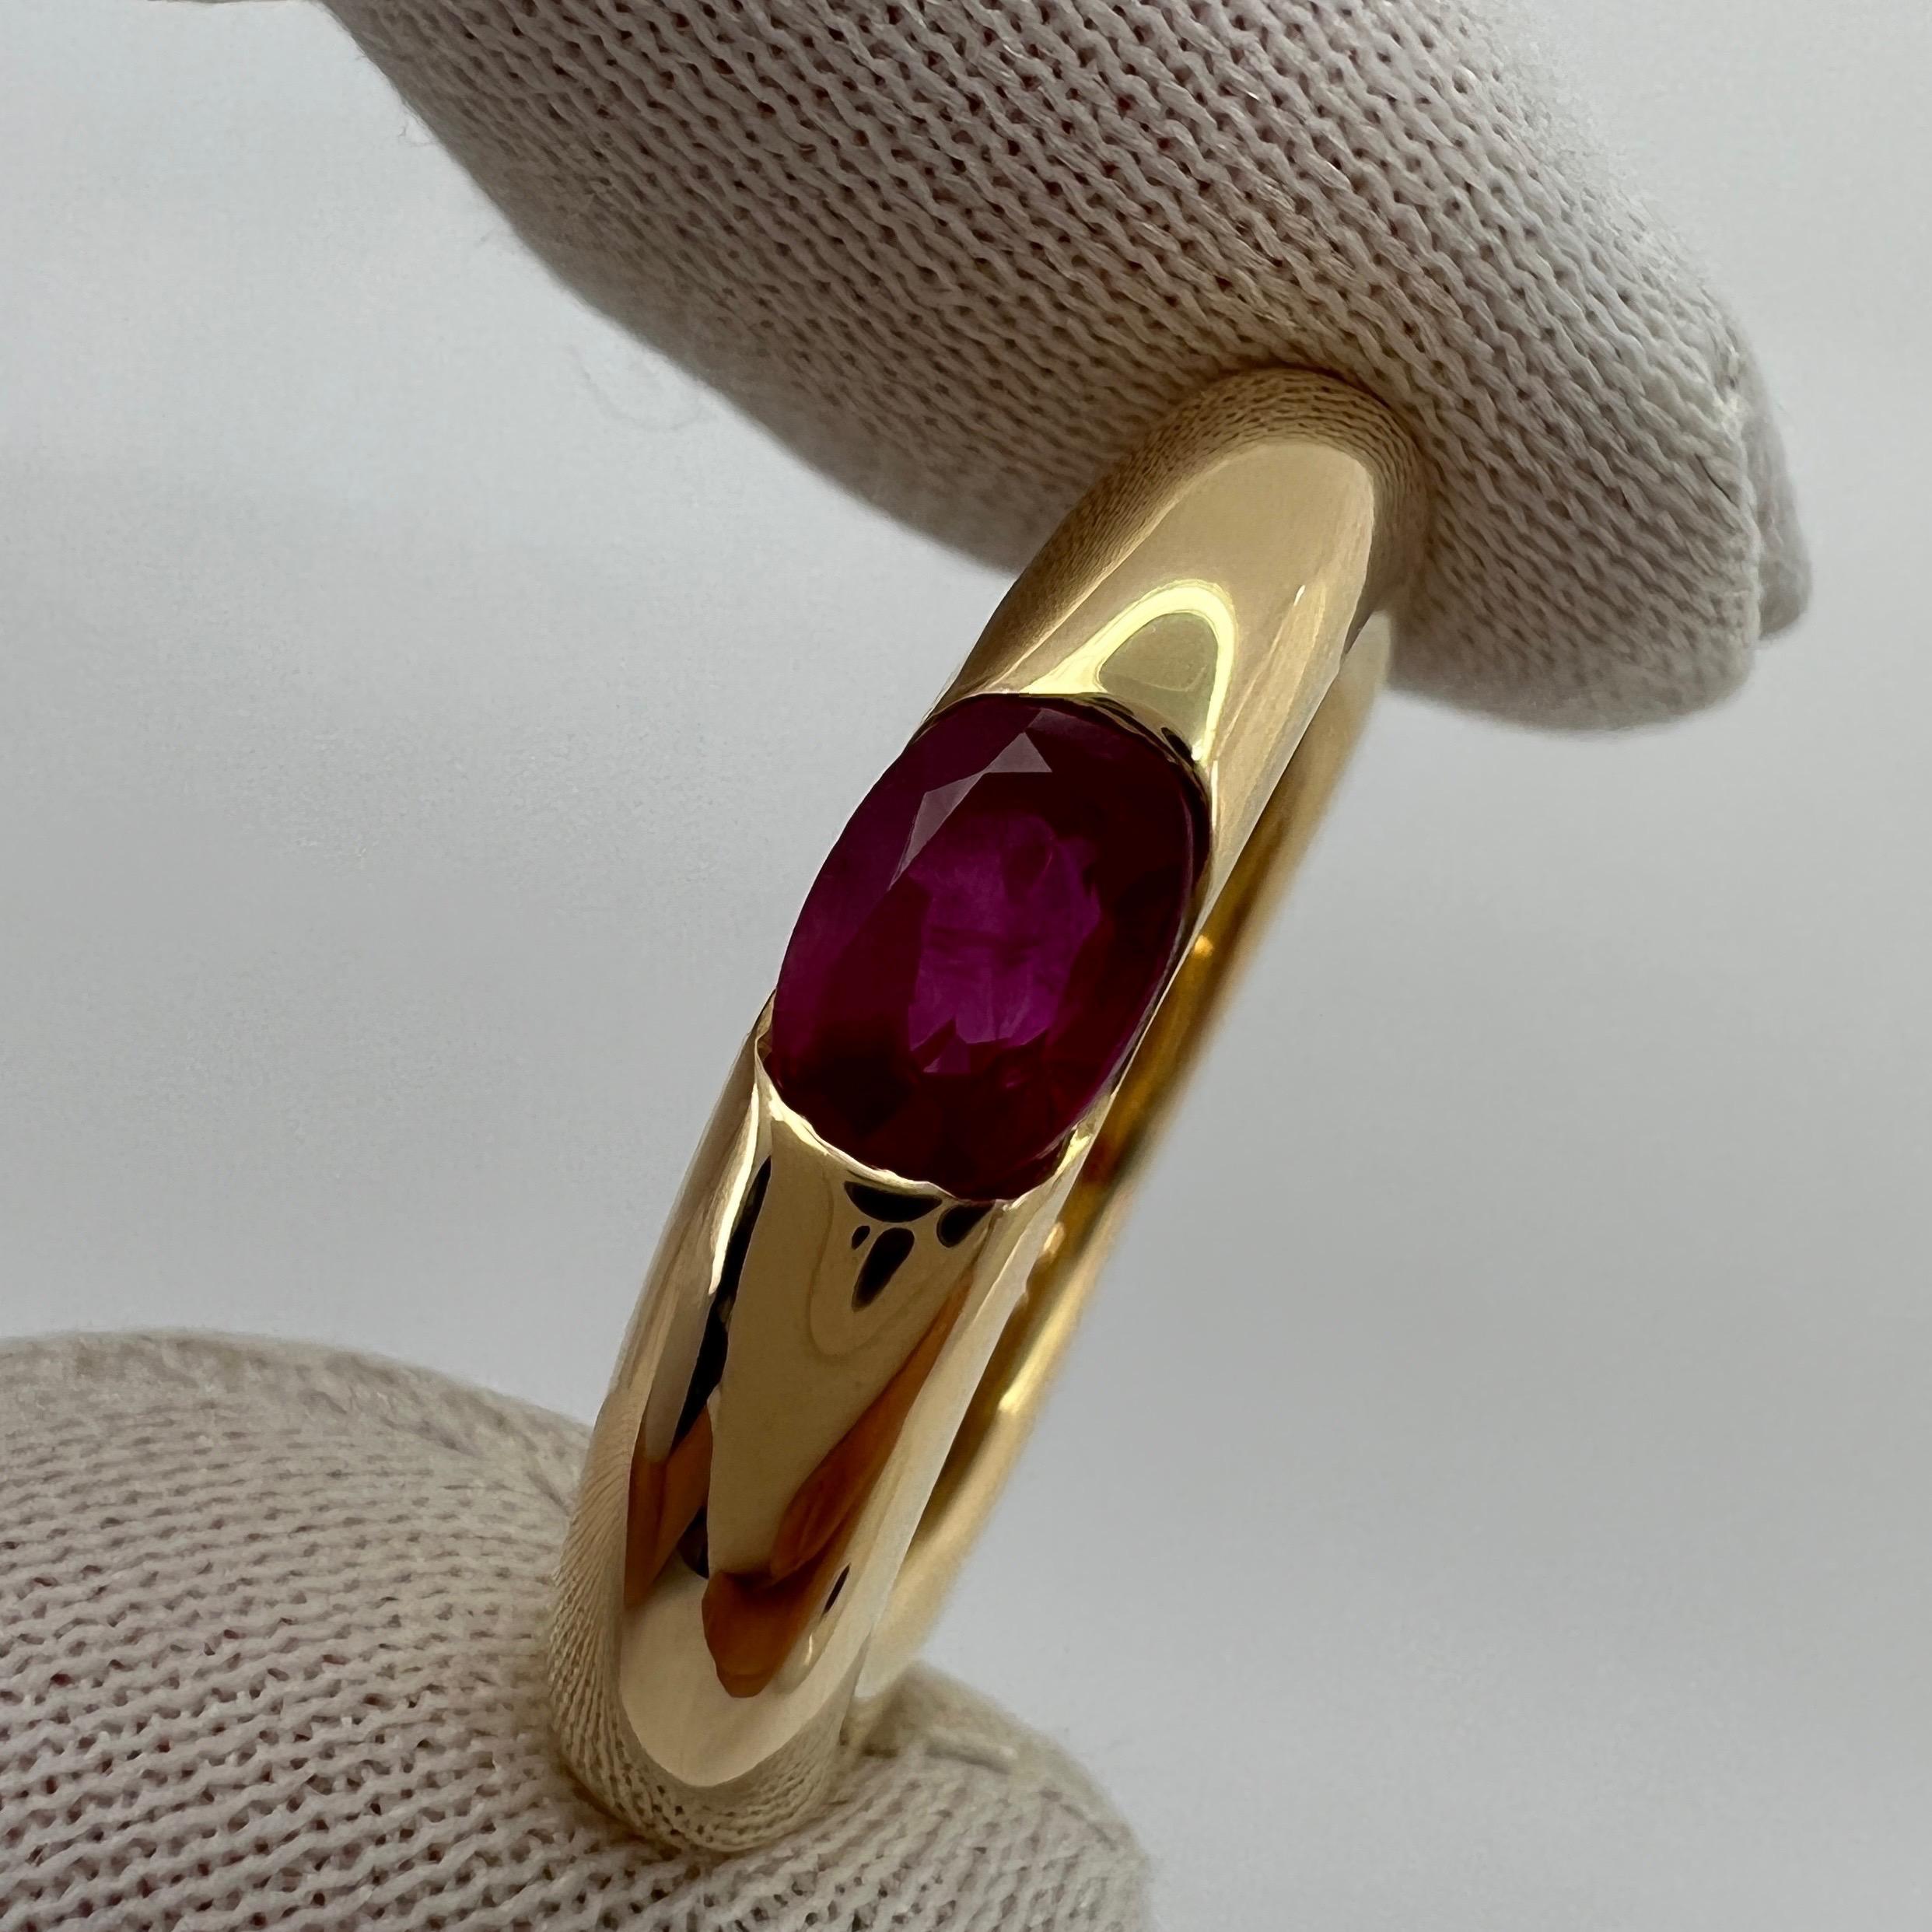 Vintage Cartier Deep Red Ruby Ellipse 18k Yellow Gold Oval Solitaire Ring 49 US5 For Sale 2